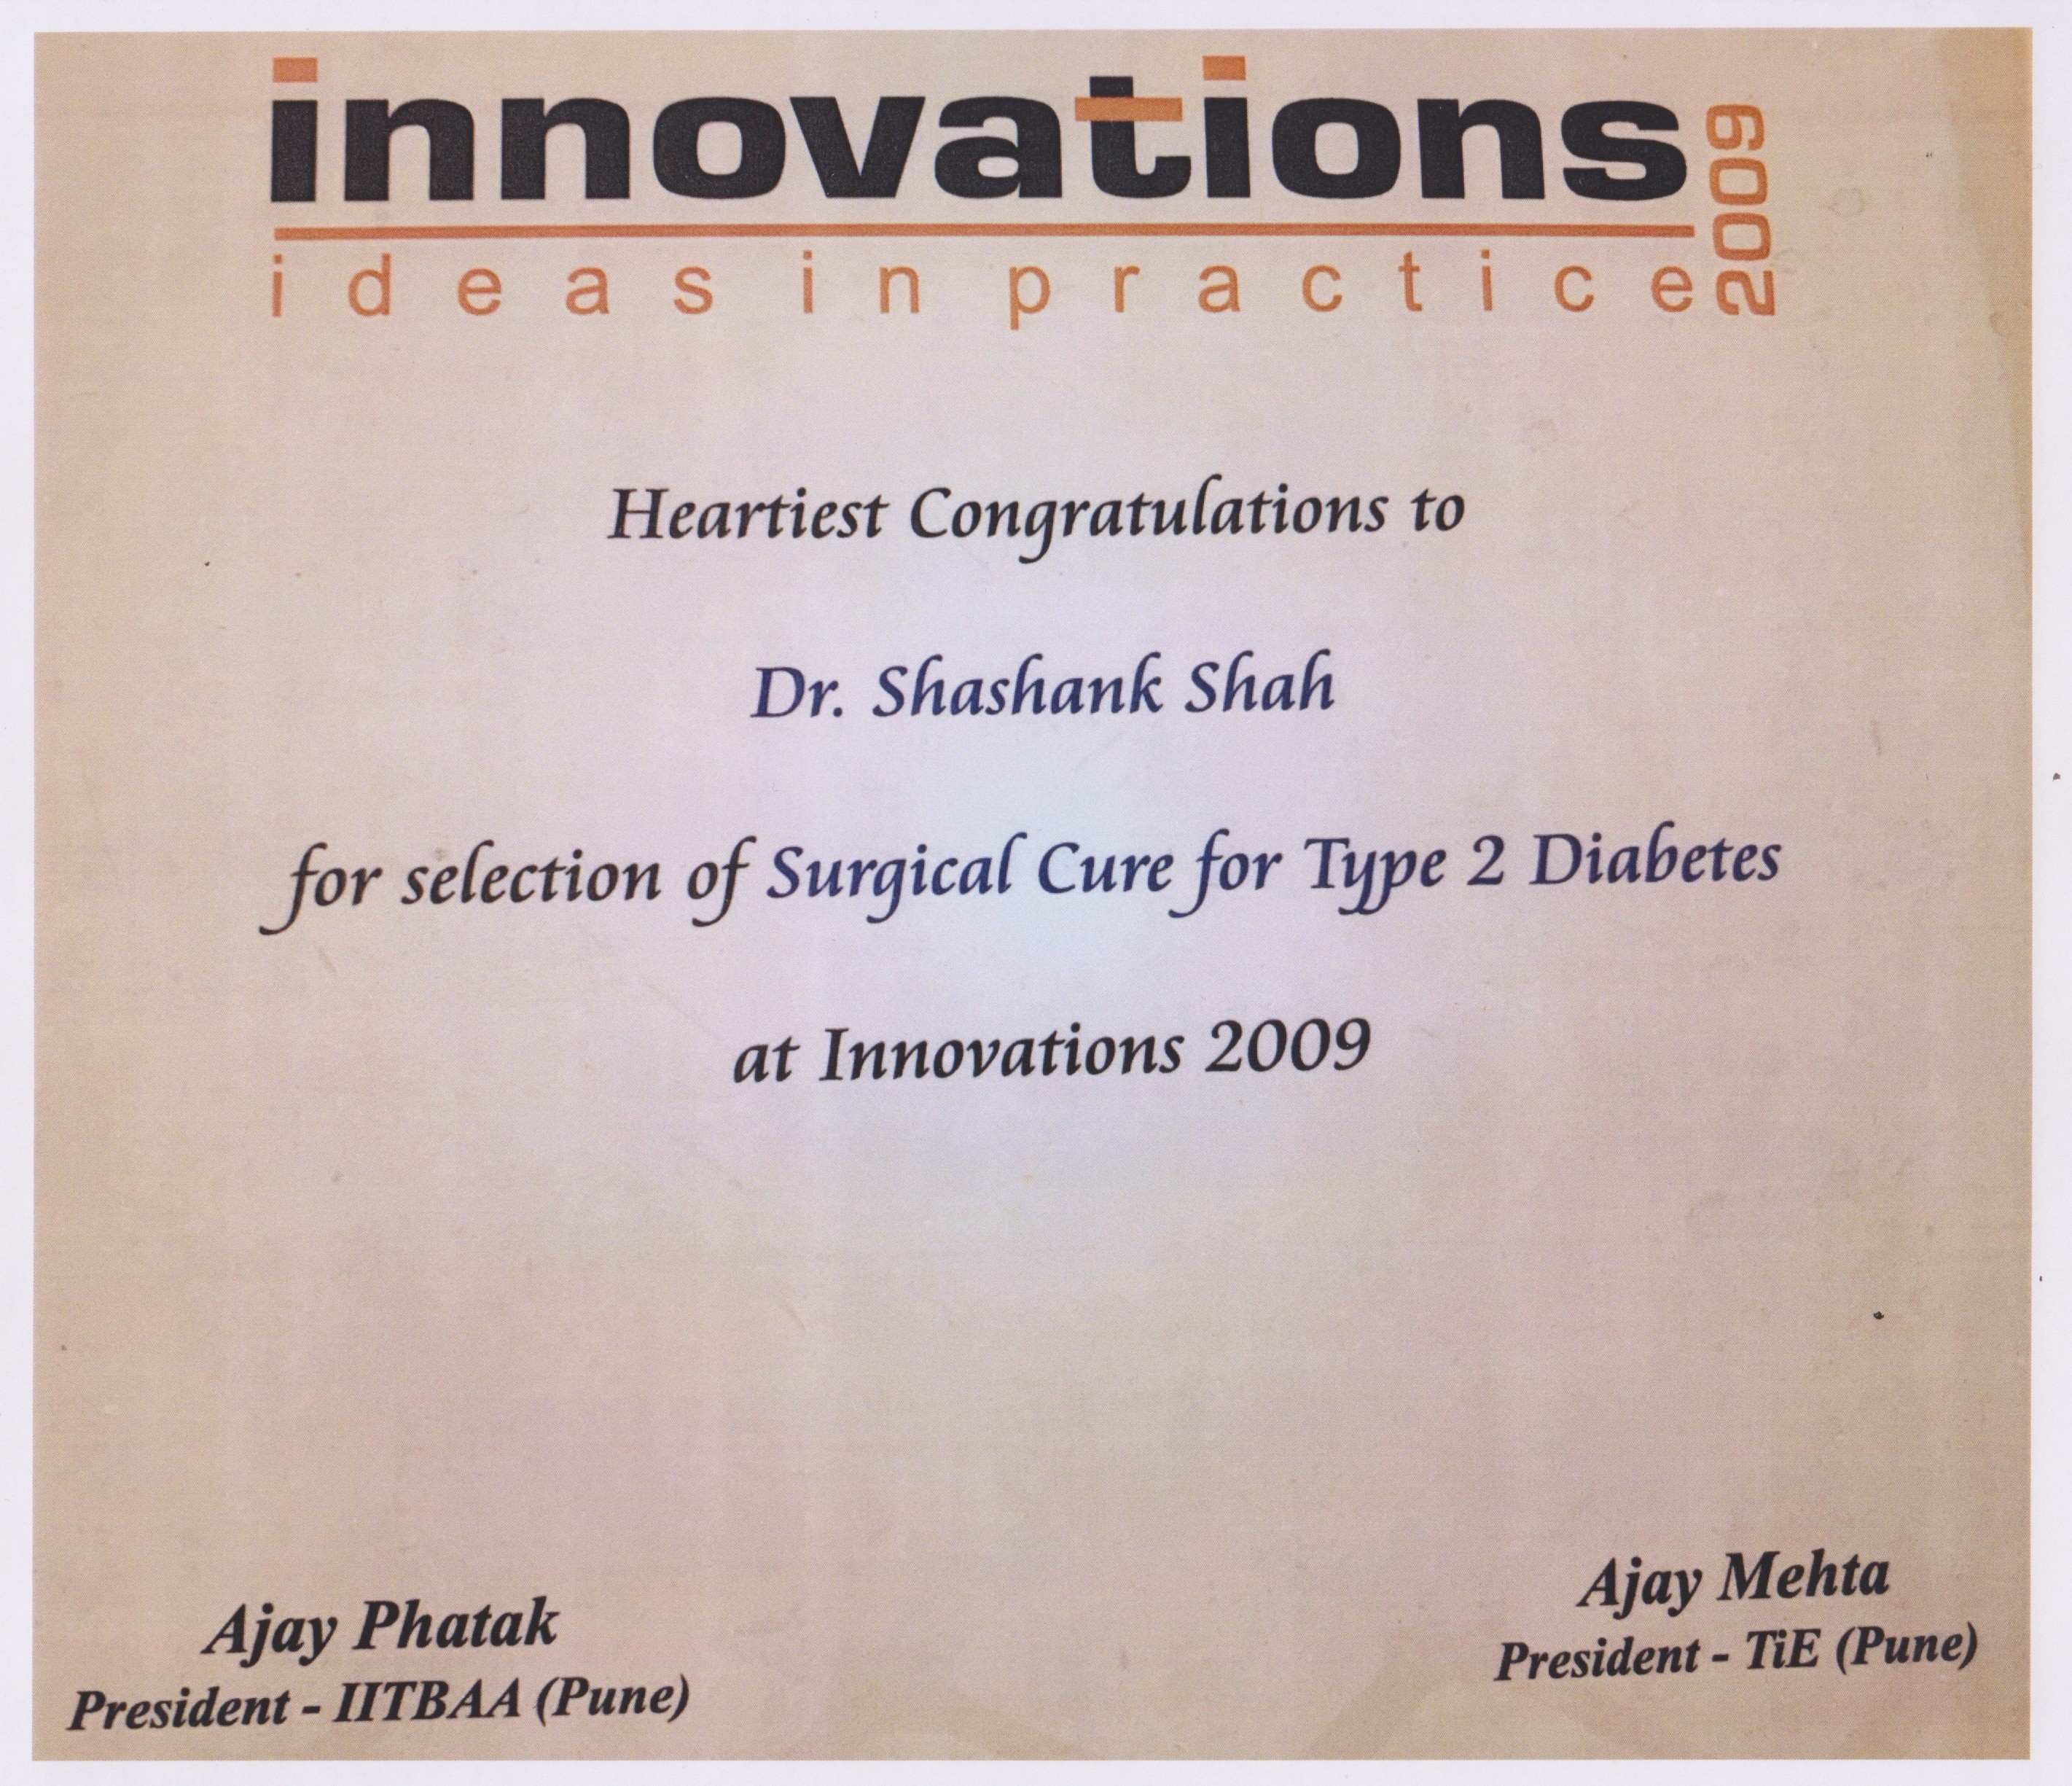 Dr Shashank Shah was awarded the IIT Innovations for Surgical Cure for Type II Diabetes at the Innovations 2009.